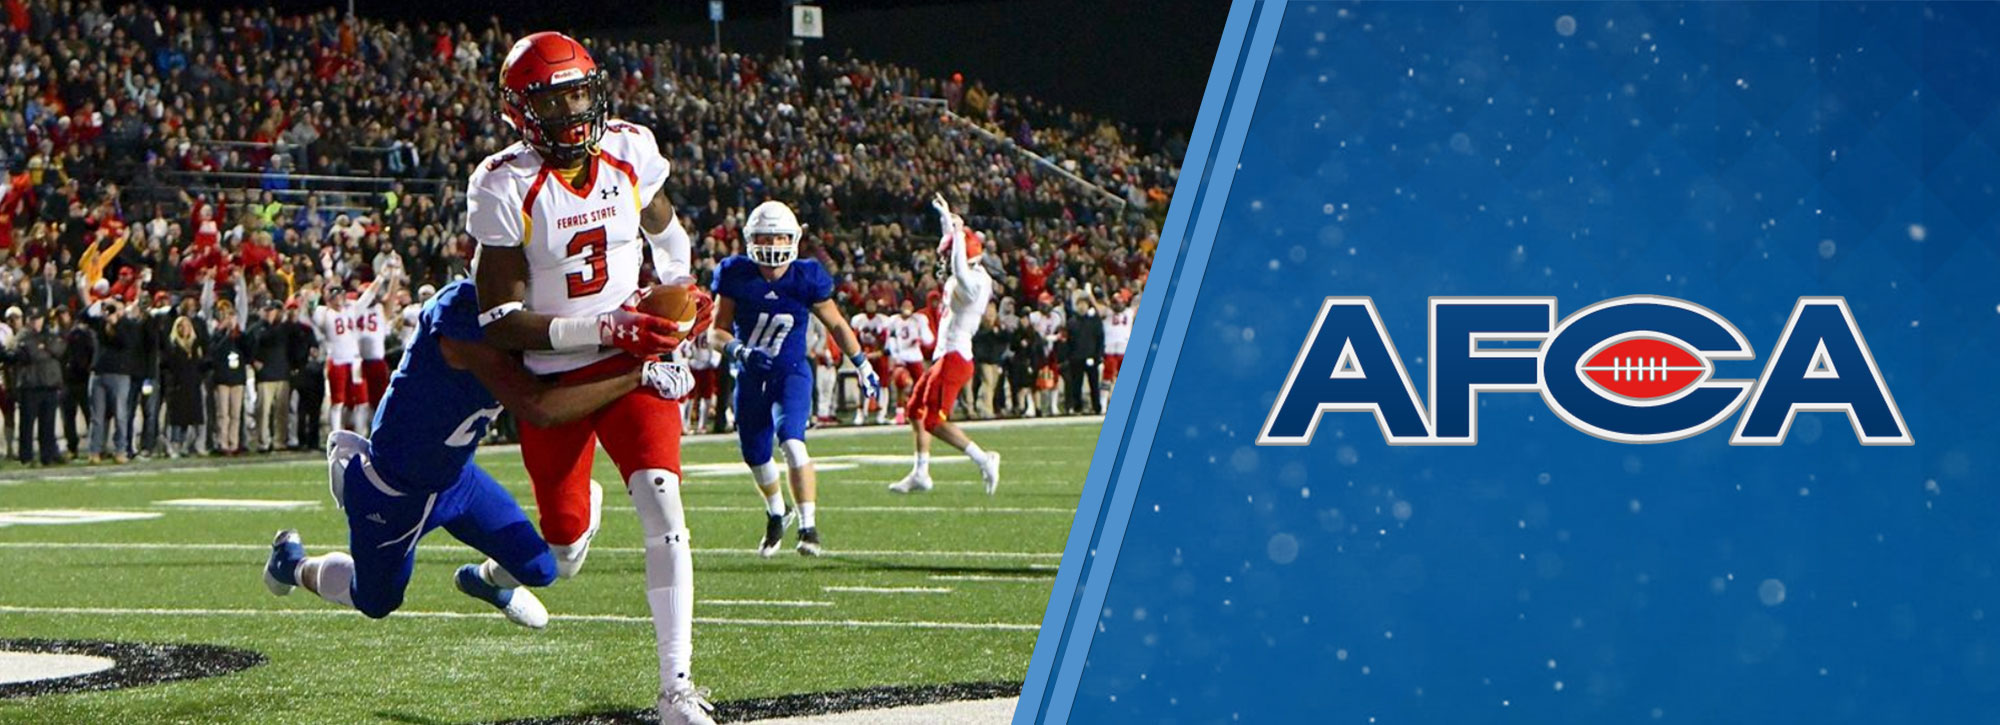 Ferris State Jumps to No. 2 in Latest AFCA Football Poll; GVSU Eighth